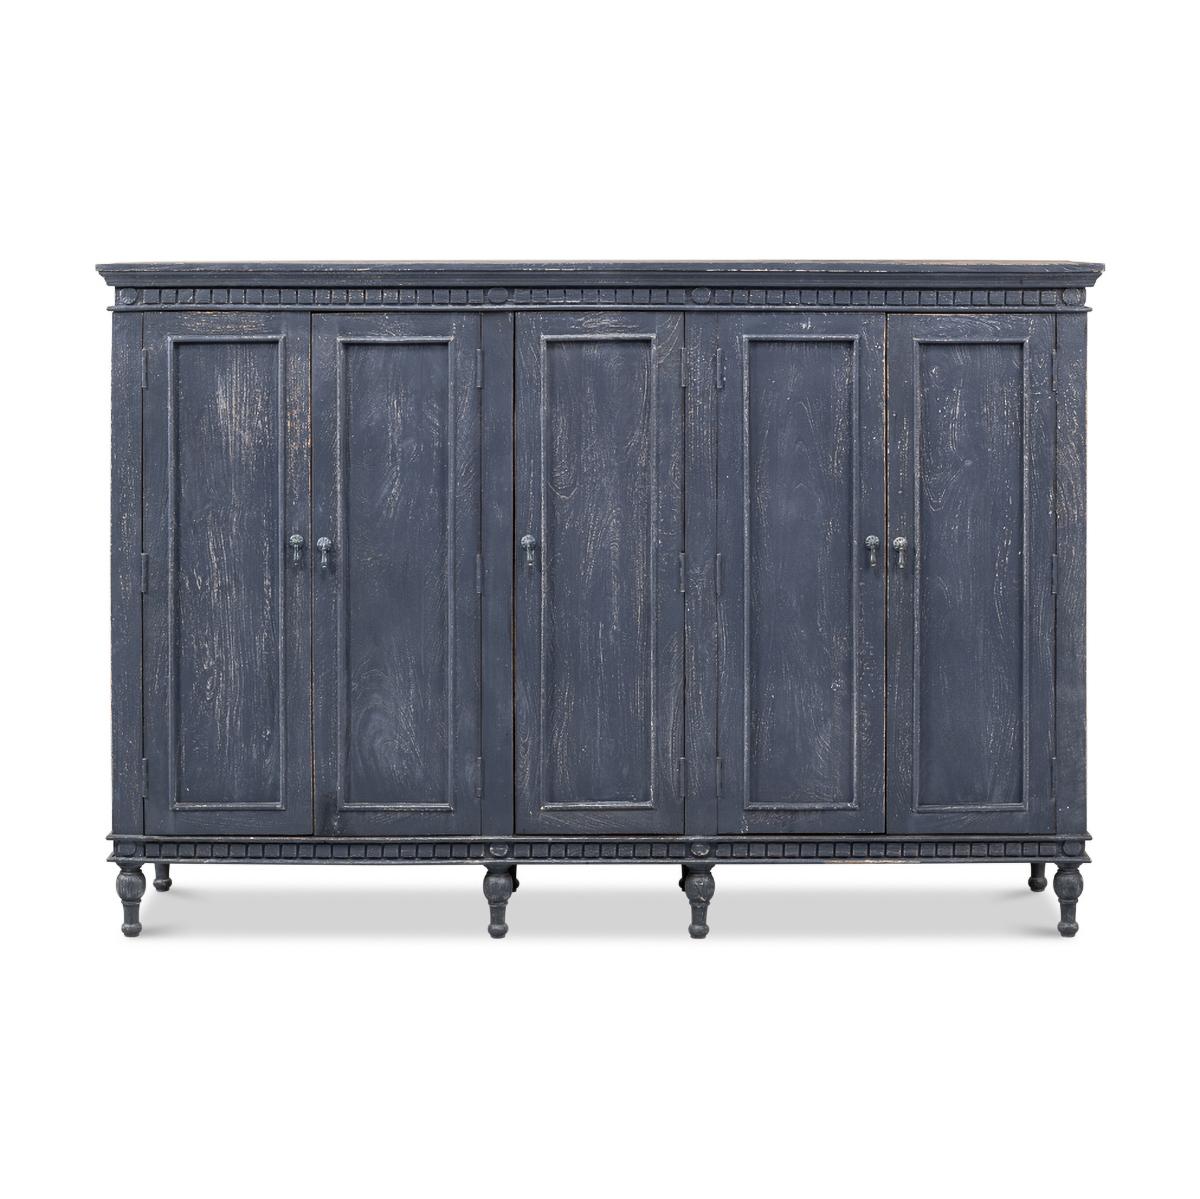 French Provincial Directoire Style Chateau blue painted credenza. This five-door sideboard is unique in the fact that it is generous at 79